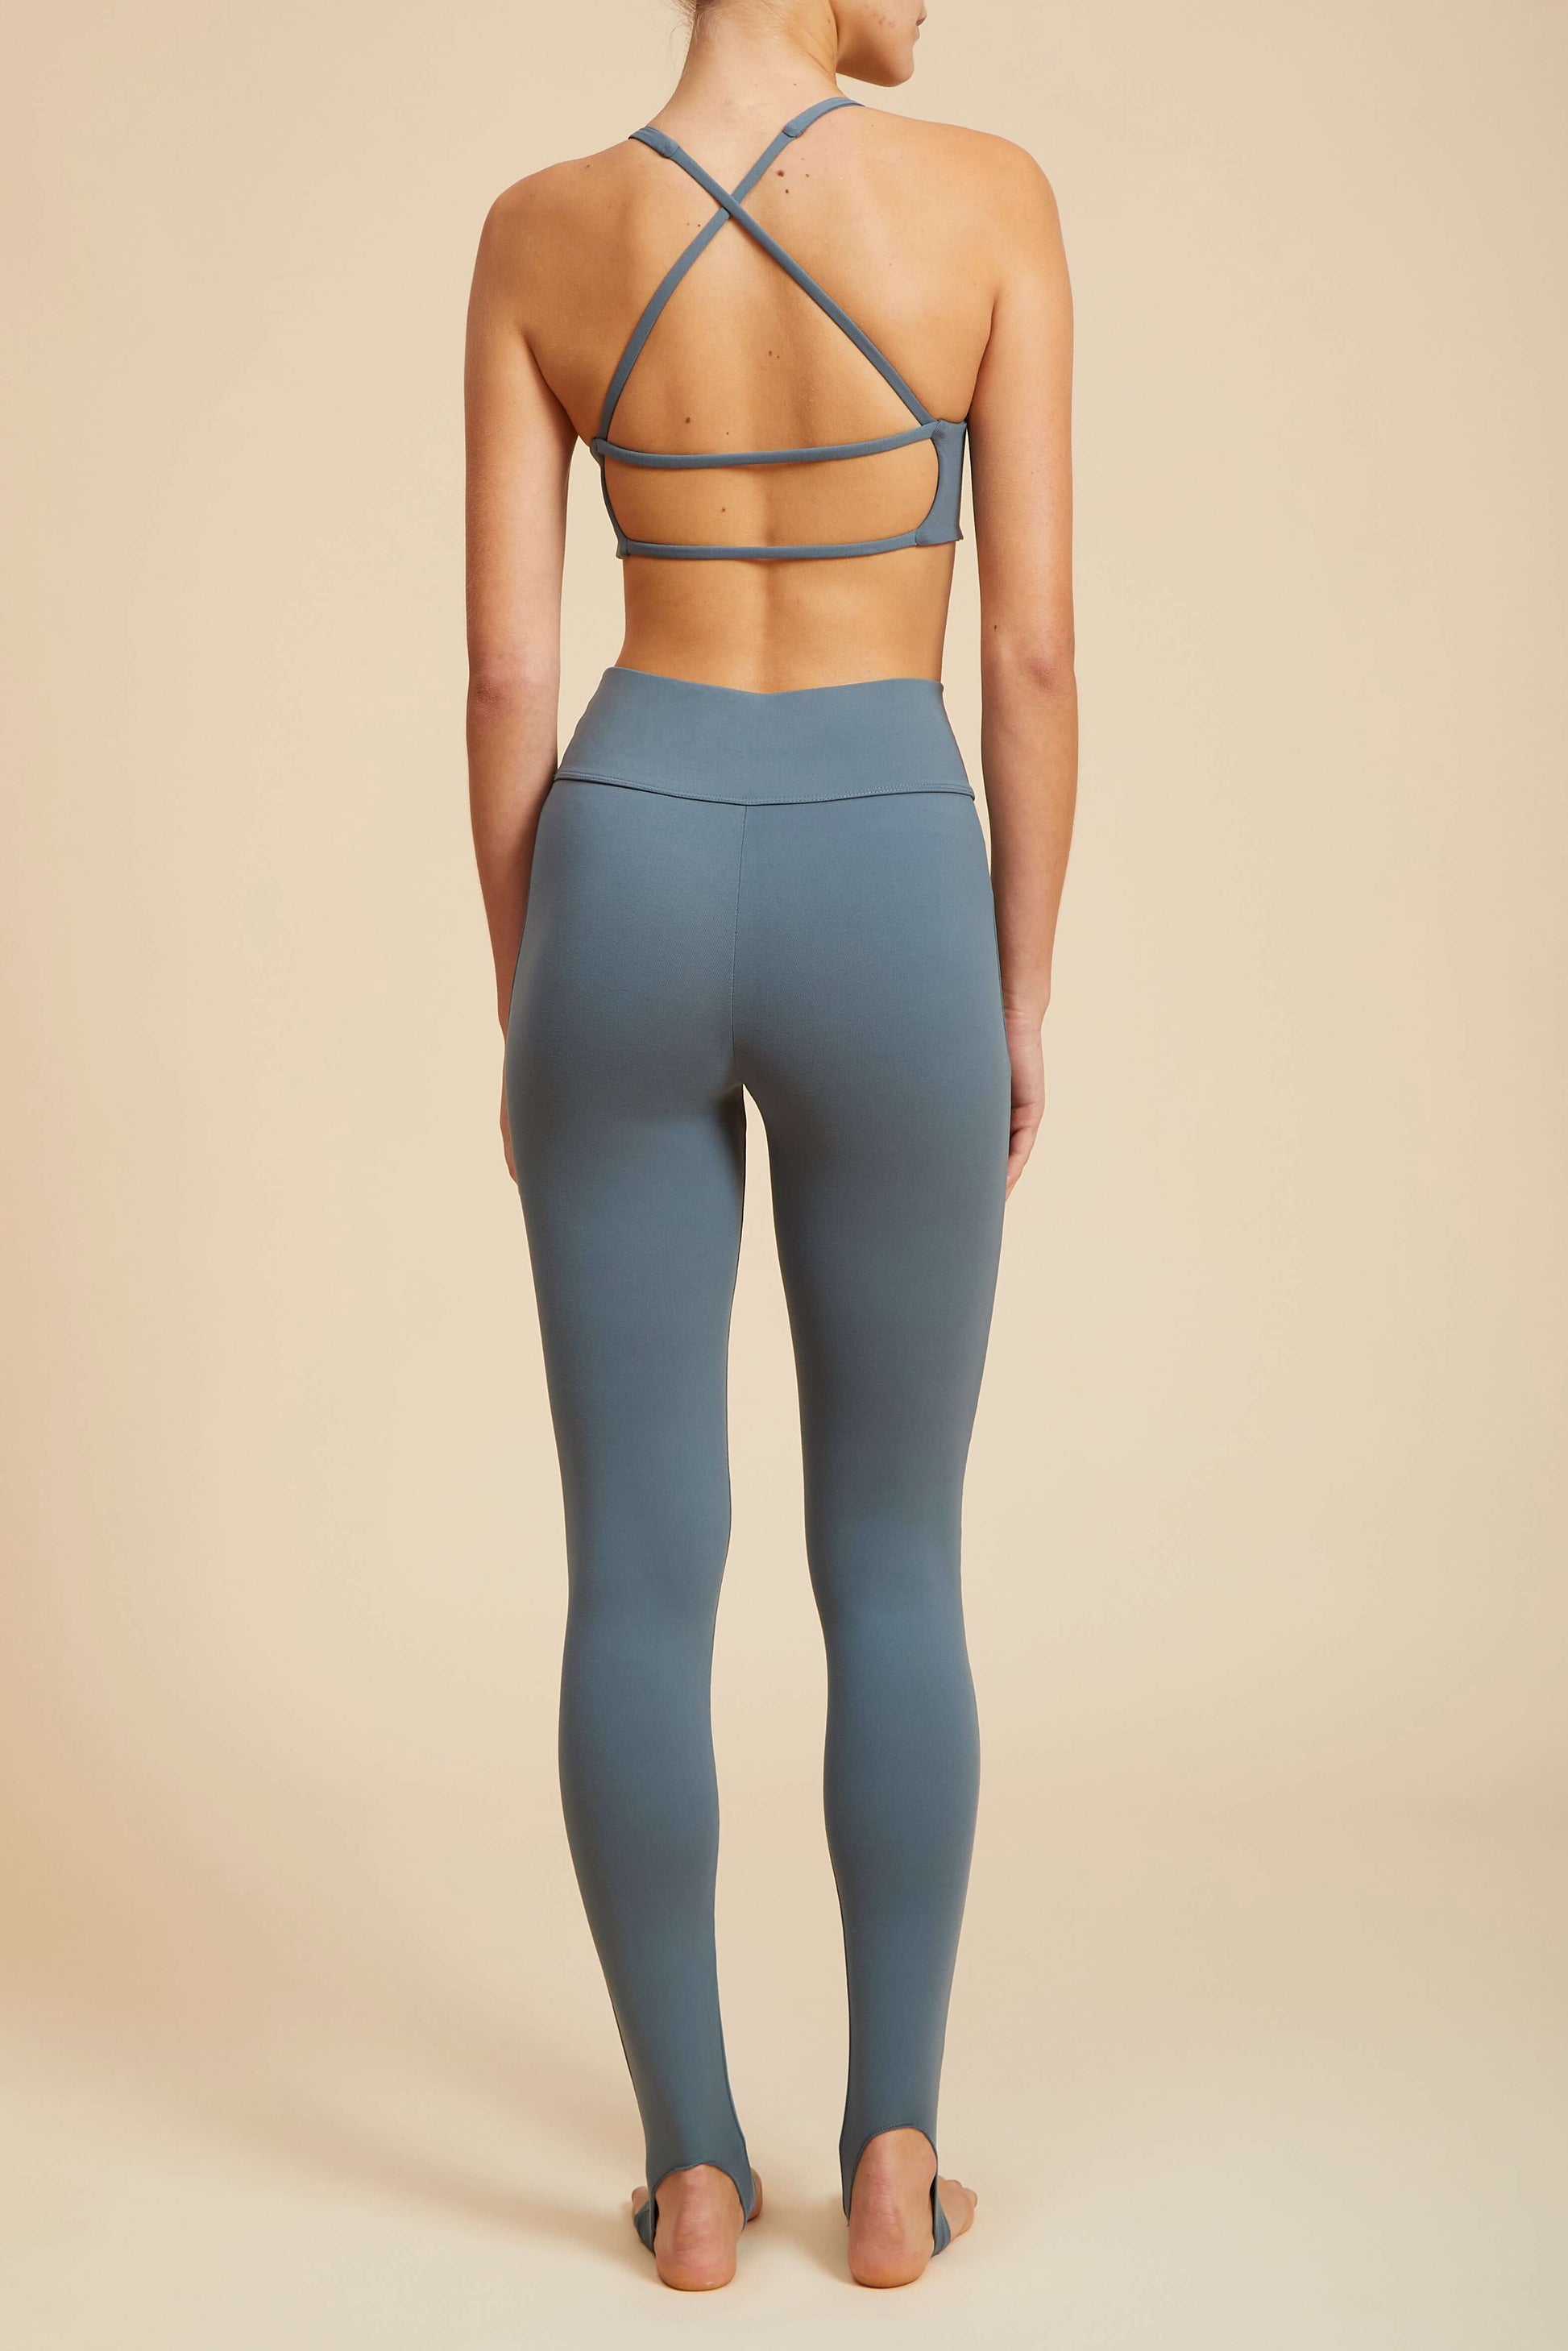 Live The Process Ballet Legging. Prima ballerina, but make it Process. Live out your ballerina fantasies in our beloved ballet-inspired legging. This feminine piece—featuring a high waist and stirrup foot—moves with you from ronde de jambe to round about